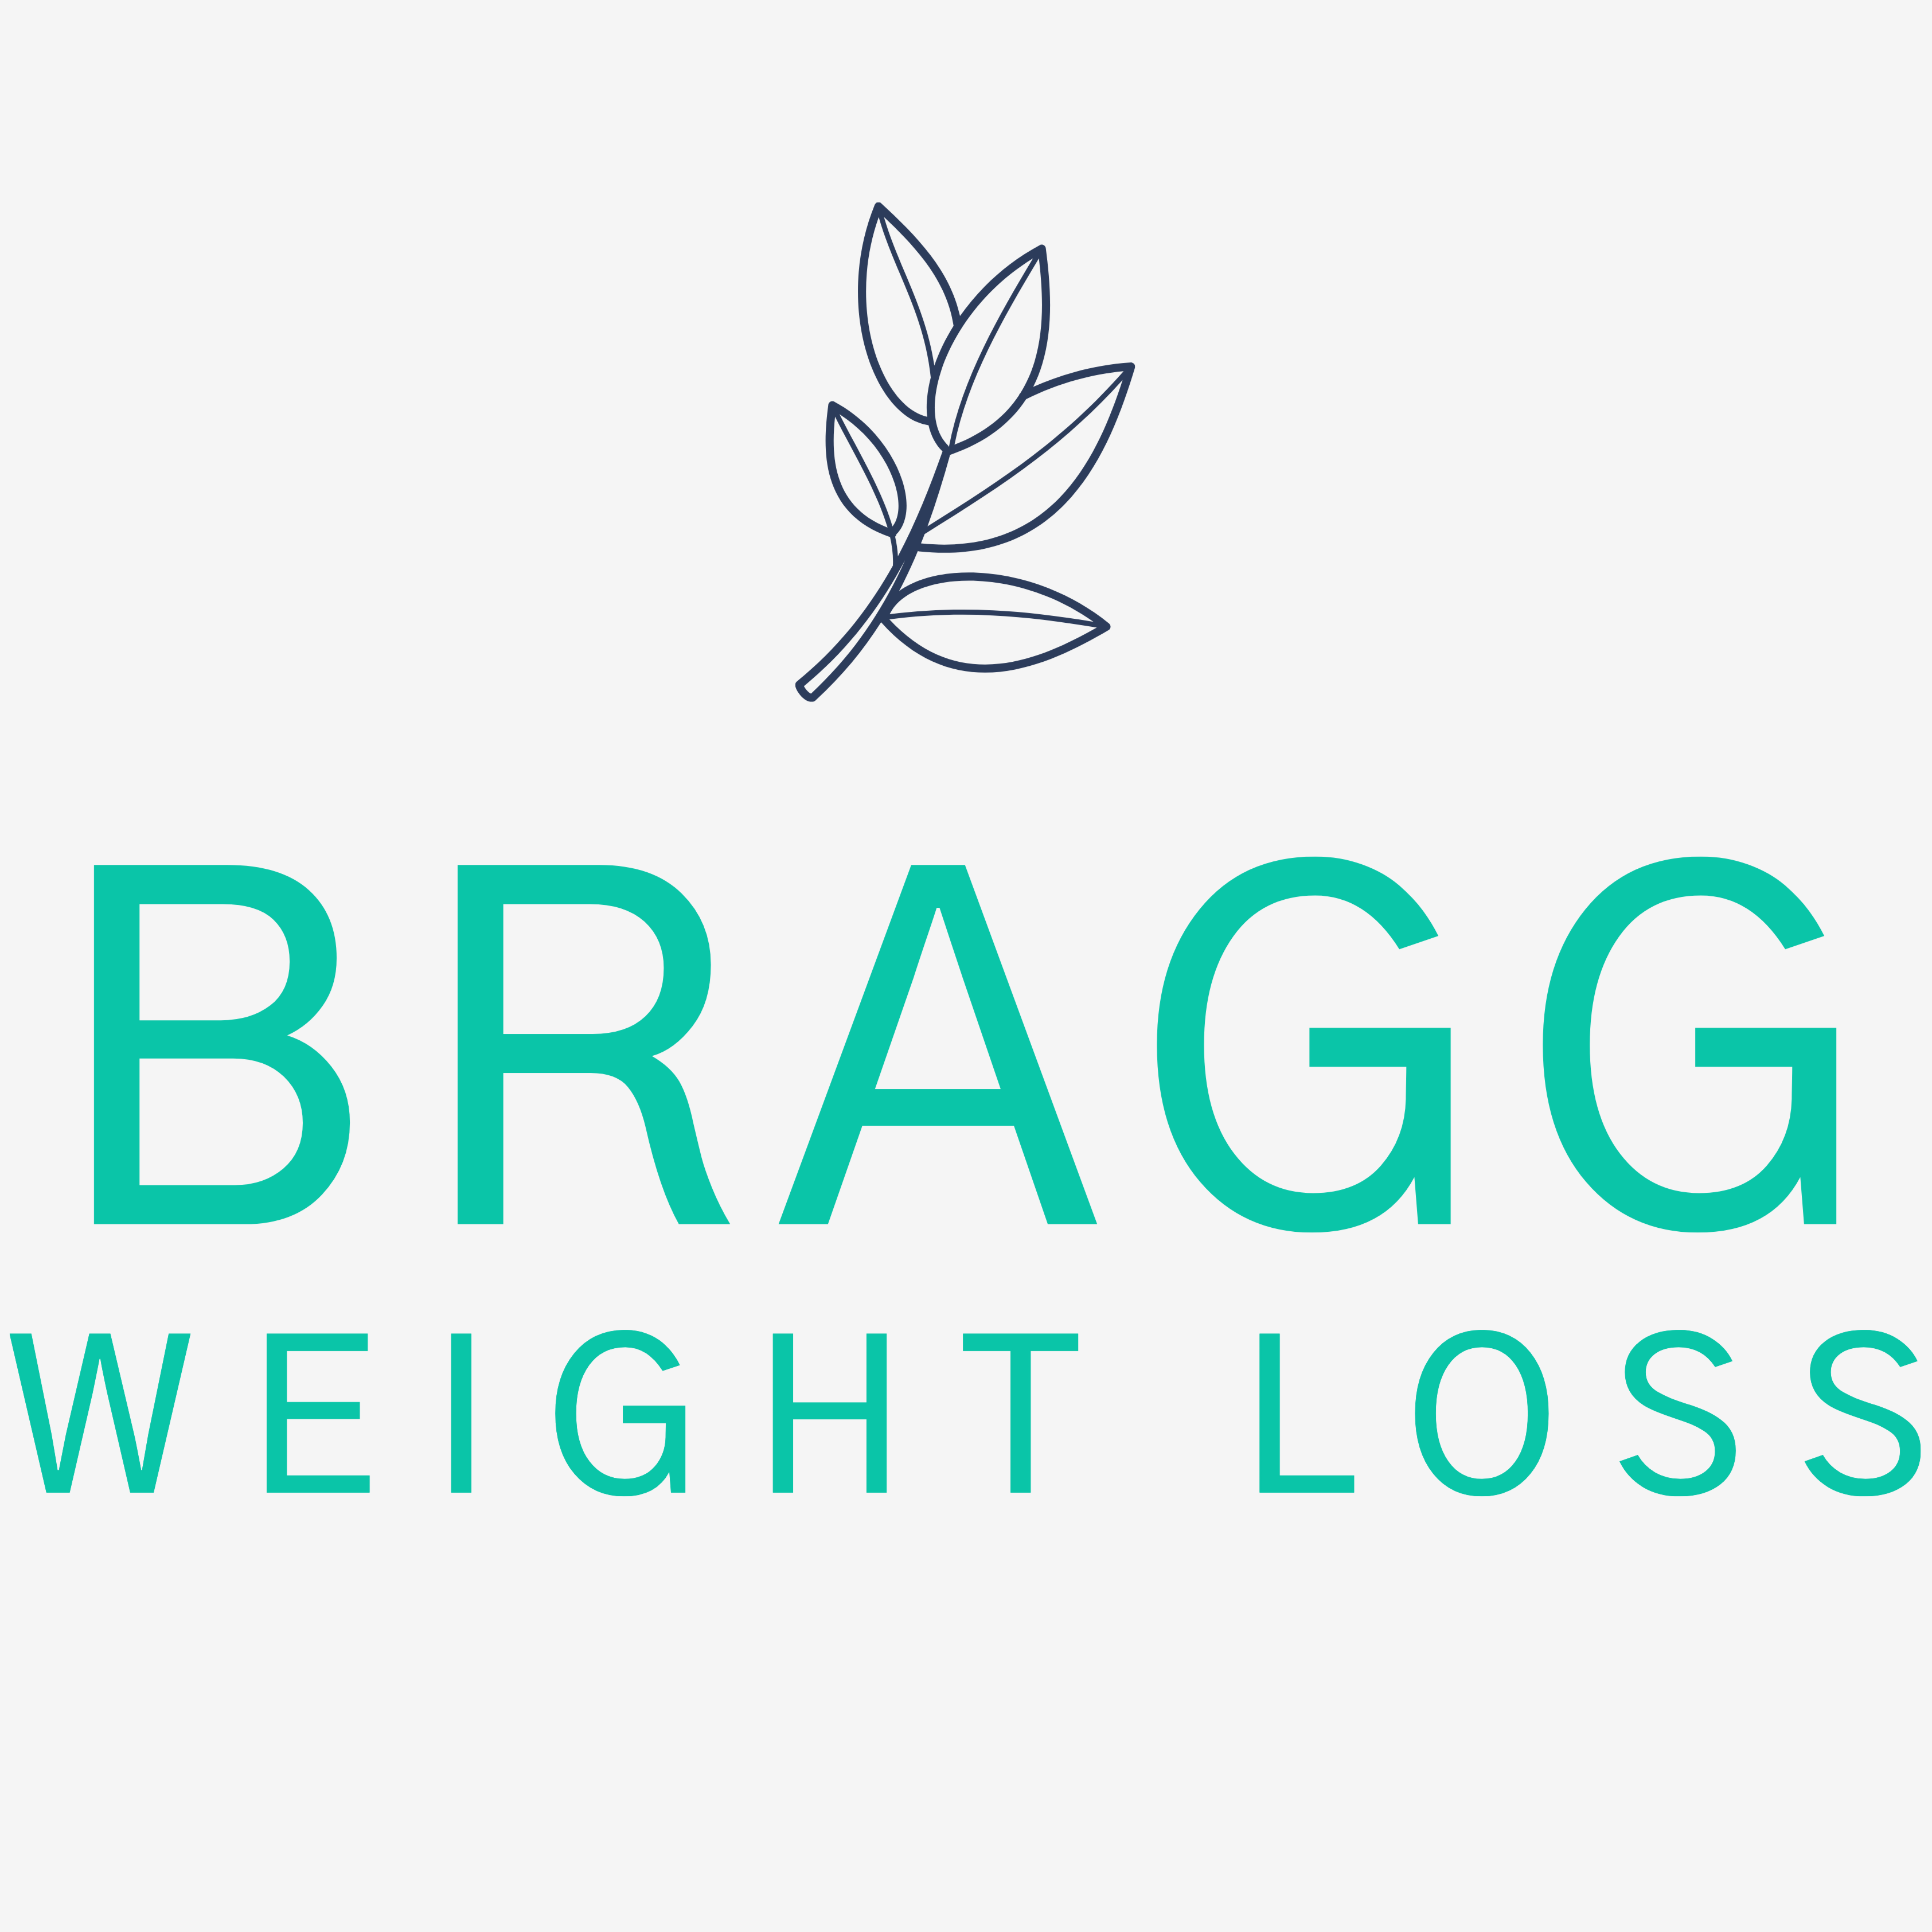 Bragg Weight Loss Maryville - Maryville, TN 37801 - (865)980-7802 | ShowMeLocal.com